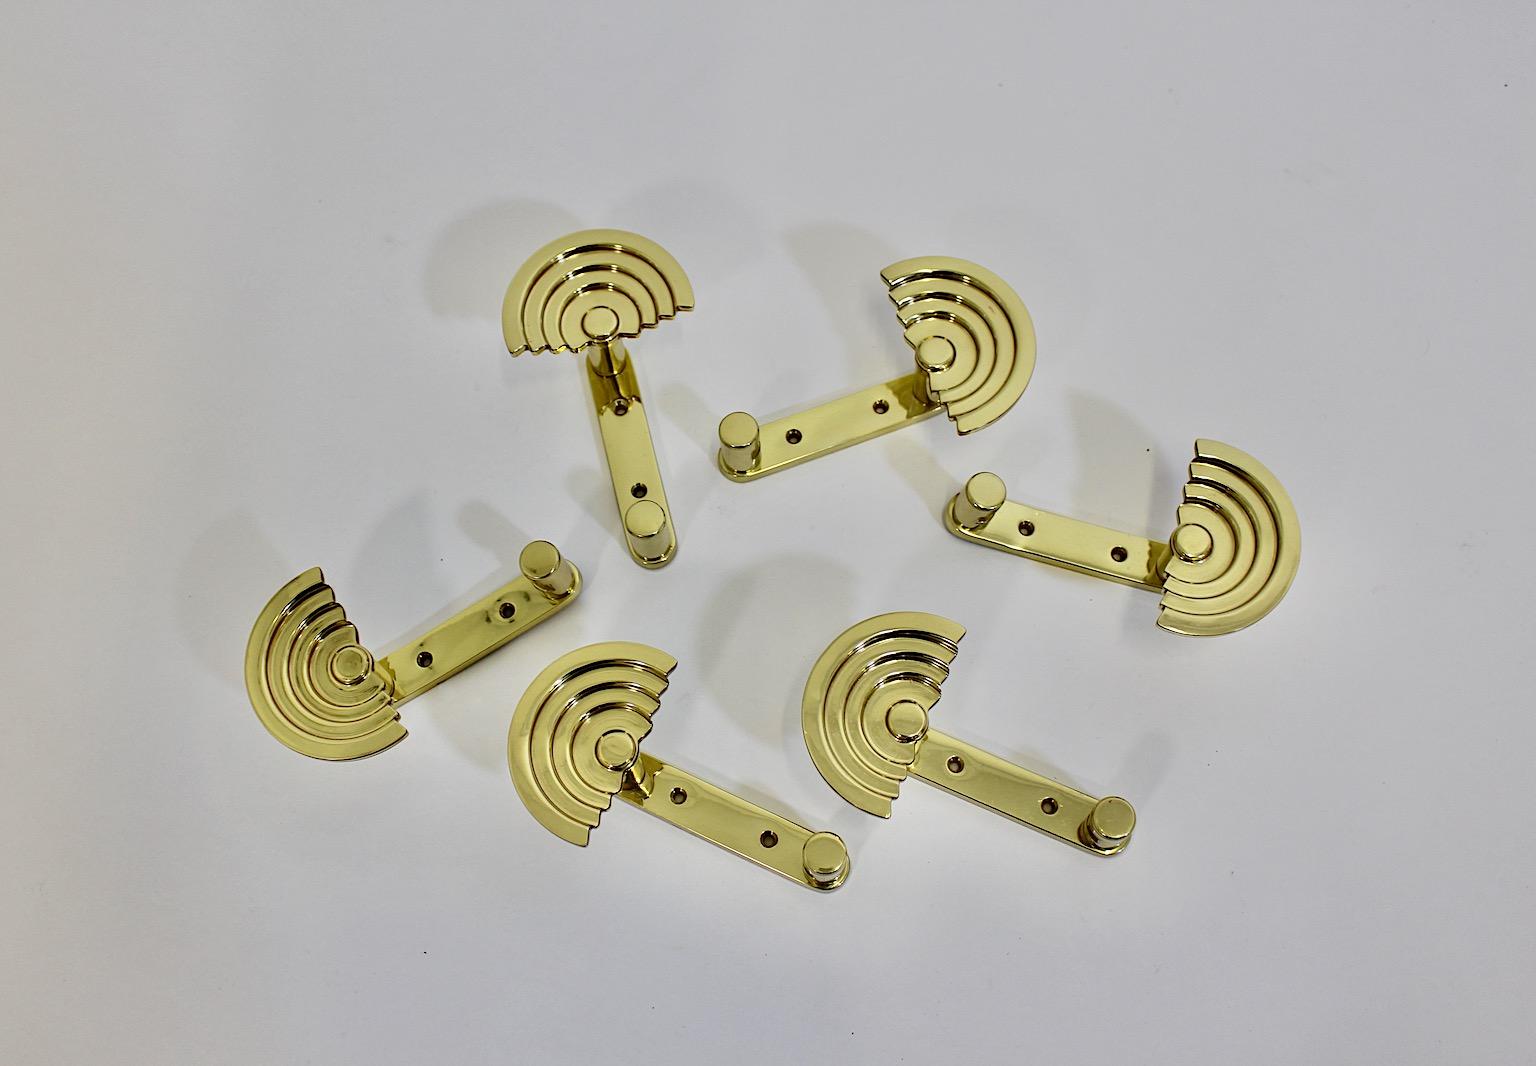 Post Modern vintage six ( 6 ) coat hooks from brass by Ettore Sottsass SE 314 for Valli & Valli circa 1985 Italy.
A great set of six coat hooks from polished brass from the Post Modern period designed by Ettore Sottsass for Valli & Valli circa 1985